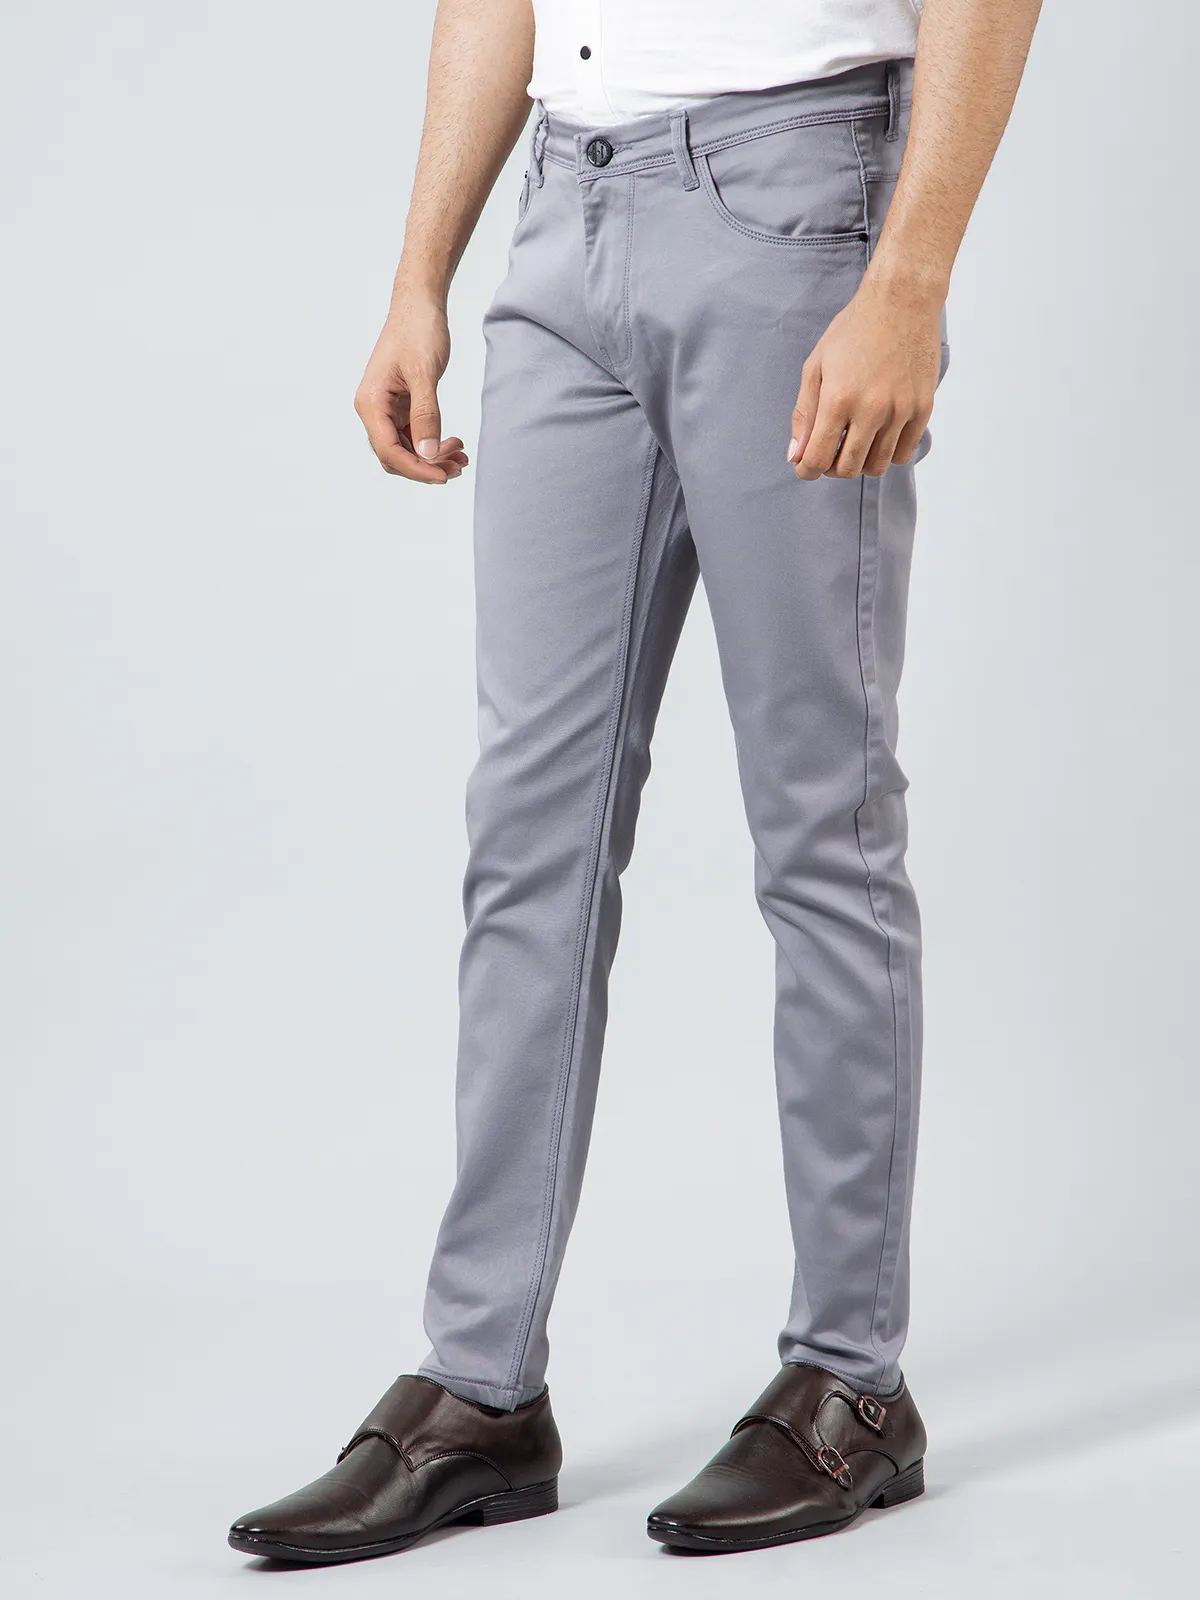 GS78 solid grey color trouser